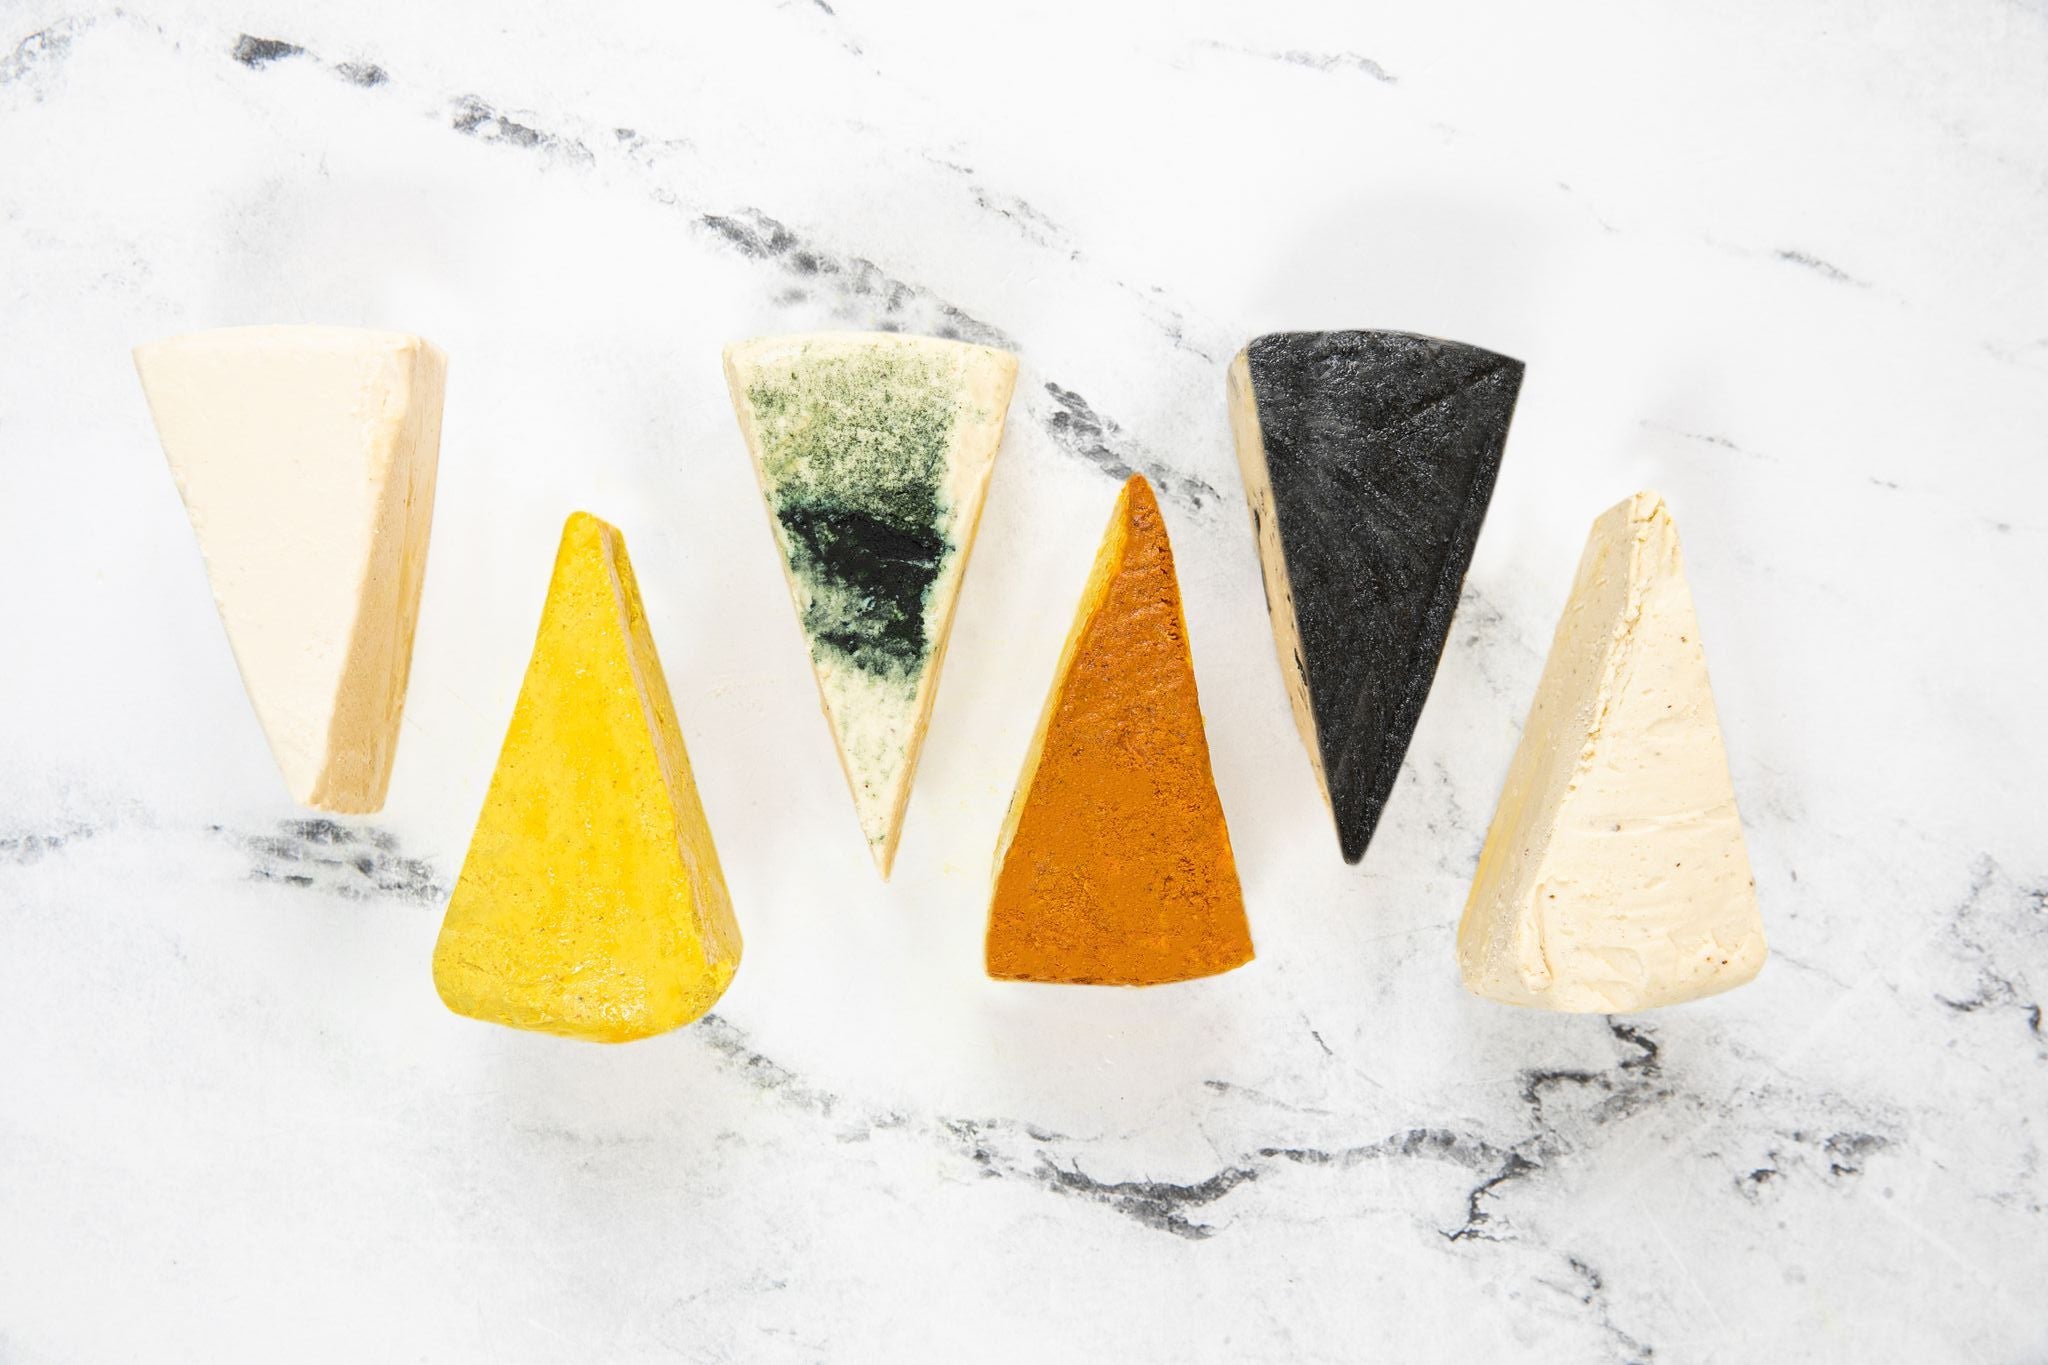 6 Flavours of Nuts For Cheese™ dairy-free cheese wedges on a white marble countertop